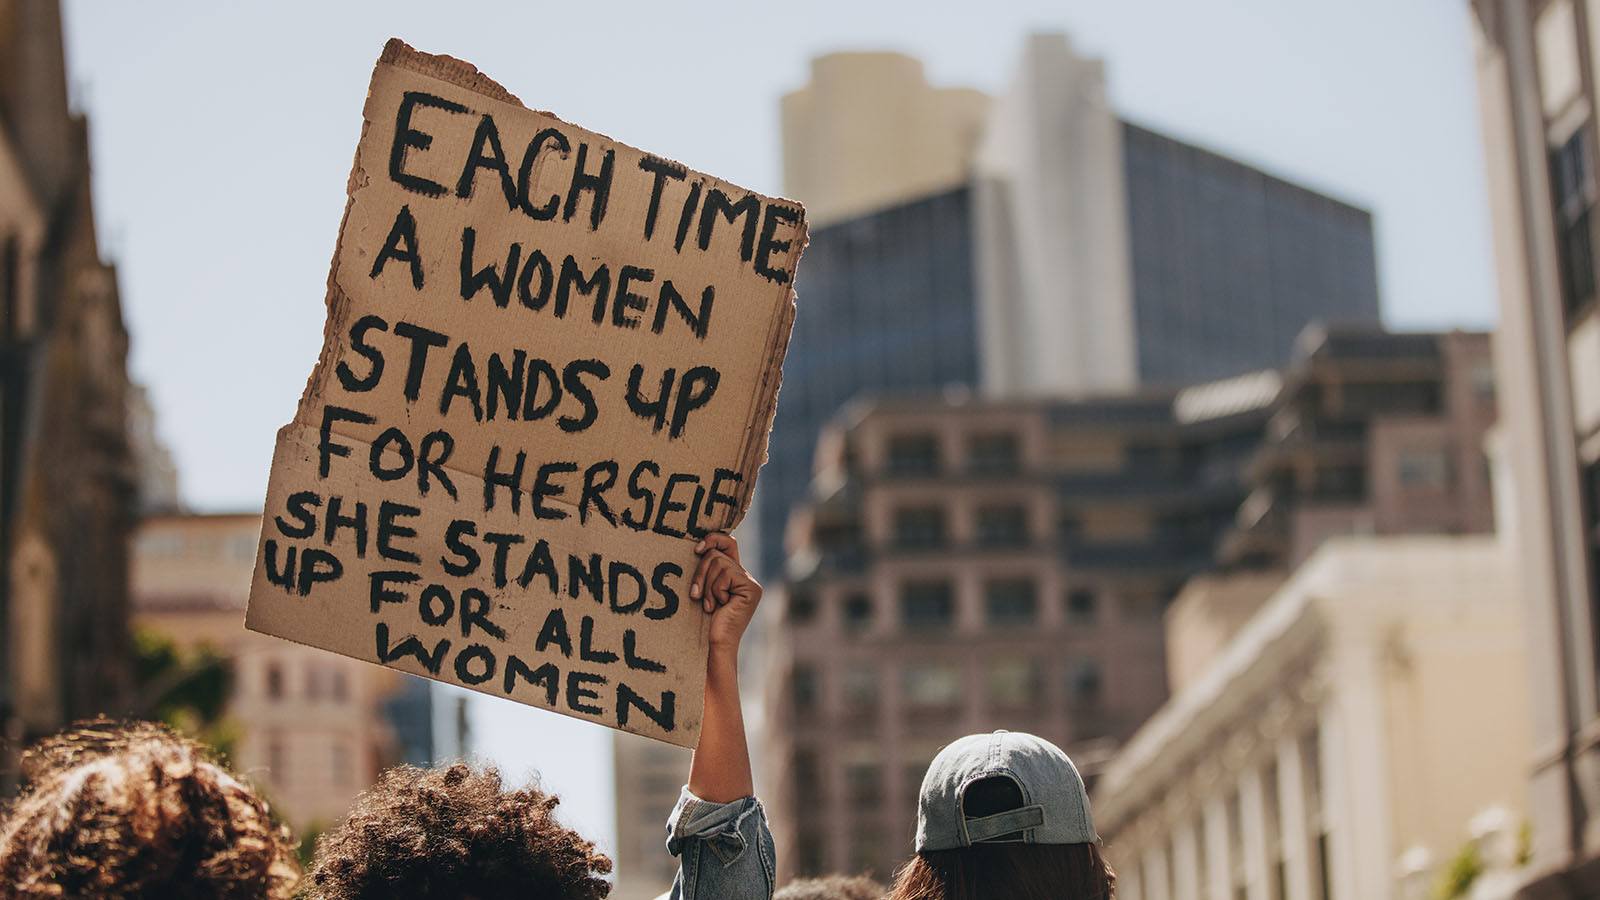 Image of a protest with a hand holding up a sign saying 'Each time a woman stands up for herself she stands up for all women.'